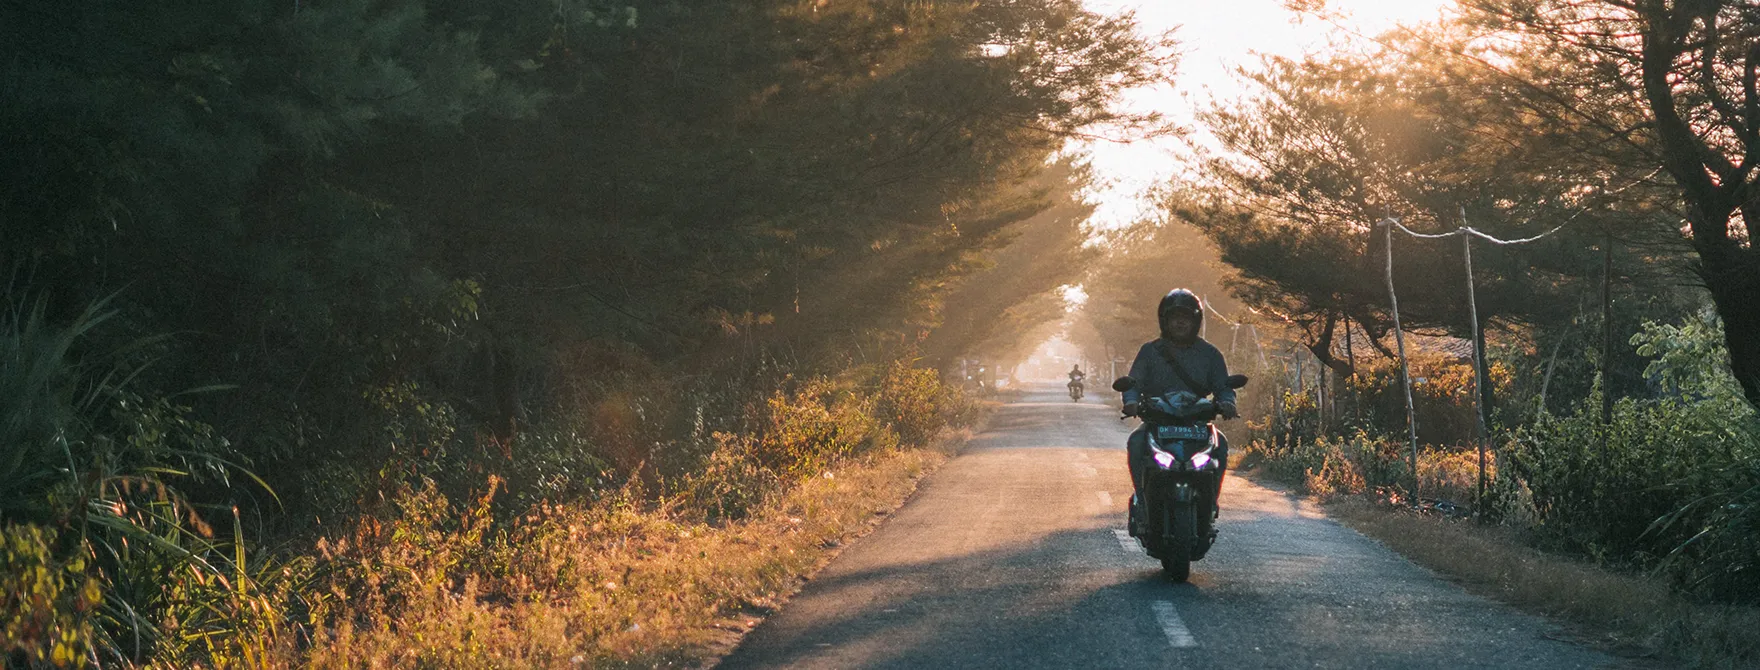 A motorcyclist driving on a road at sunset